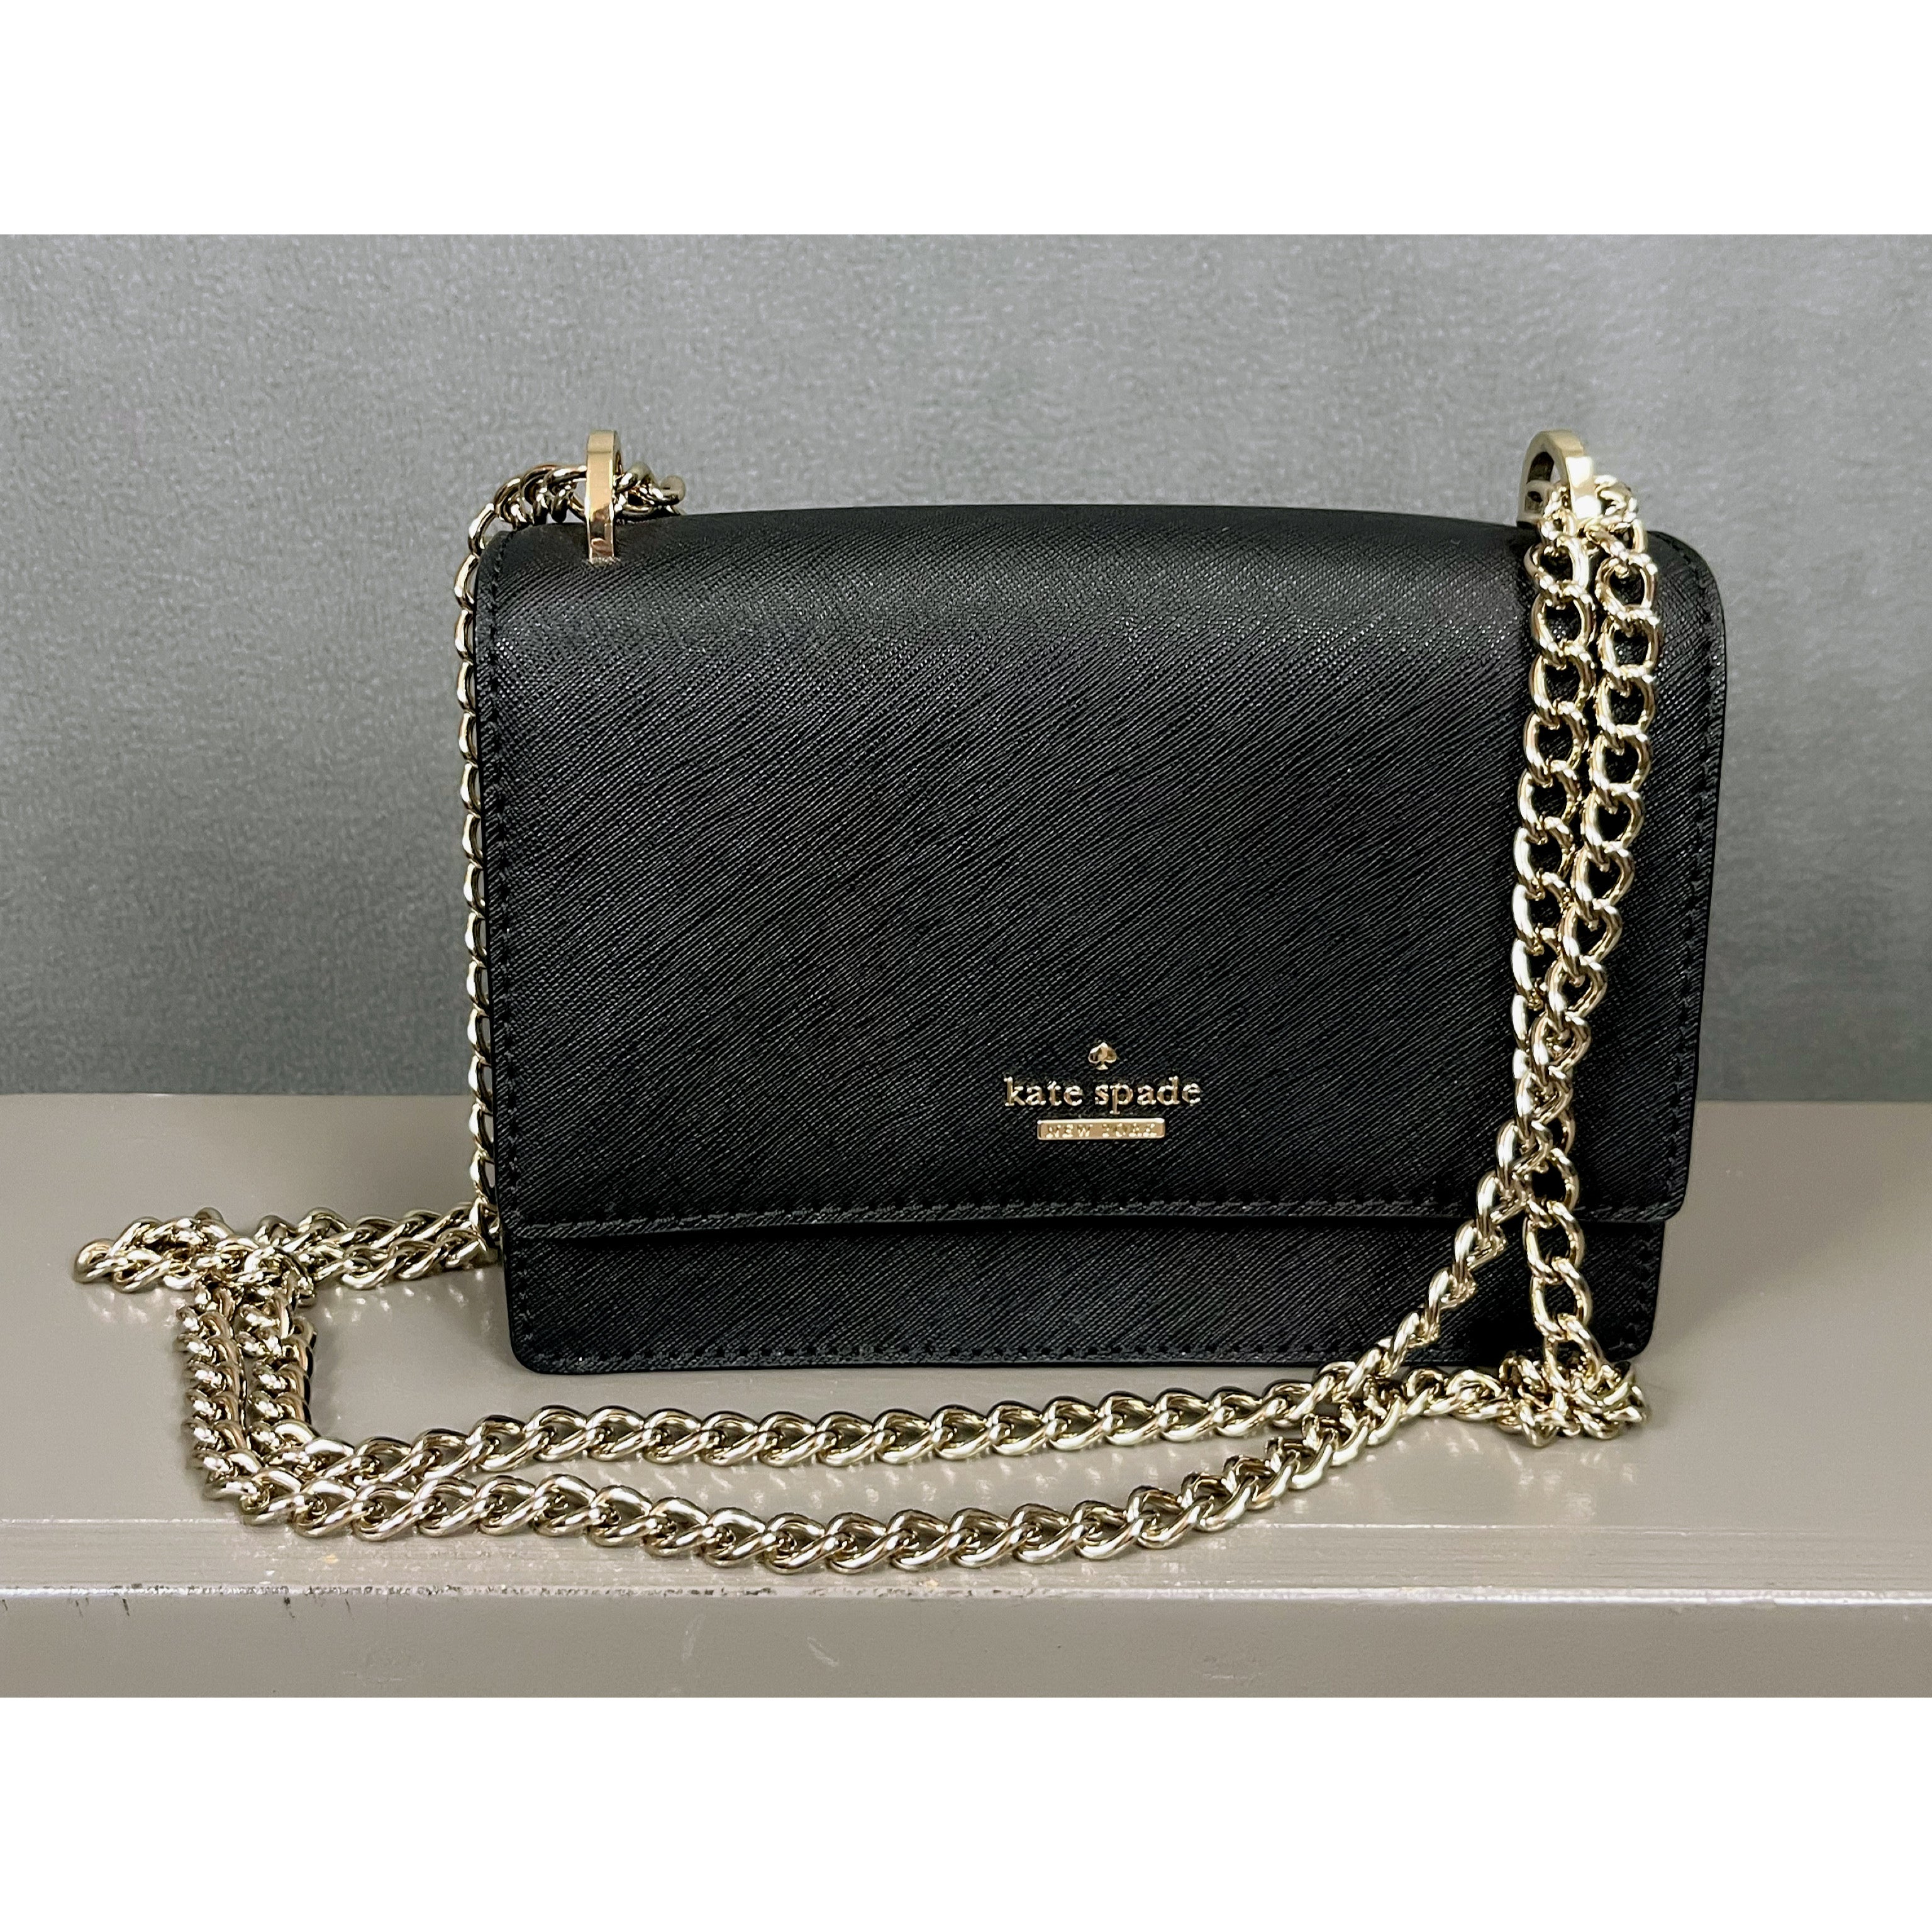 Kate Spade black bag with gold chain, like new!